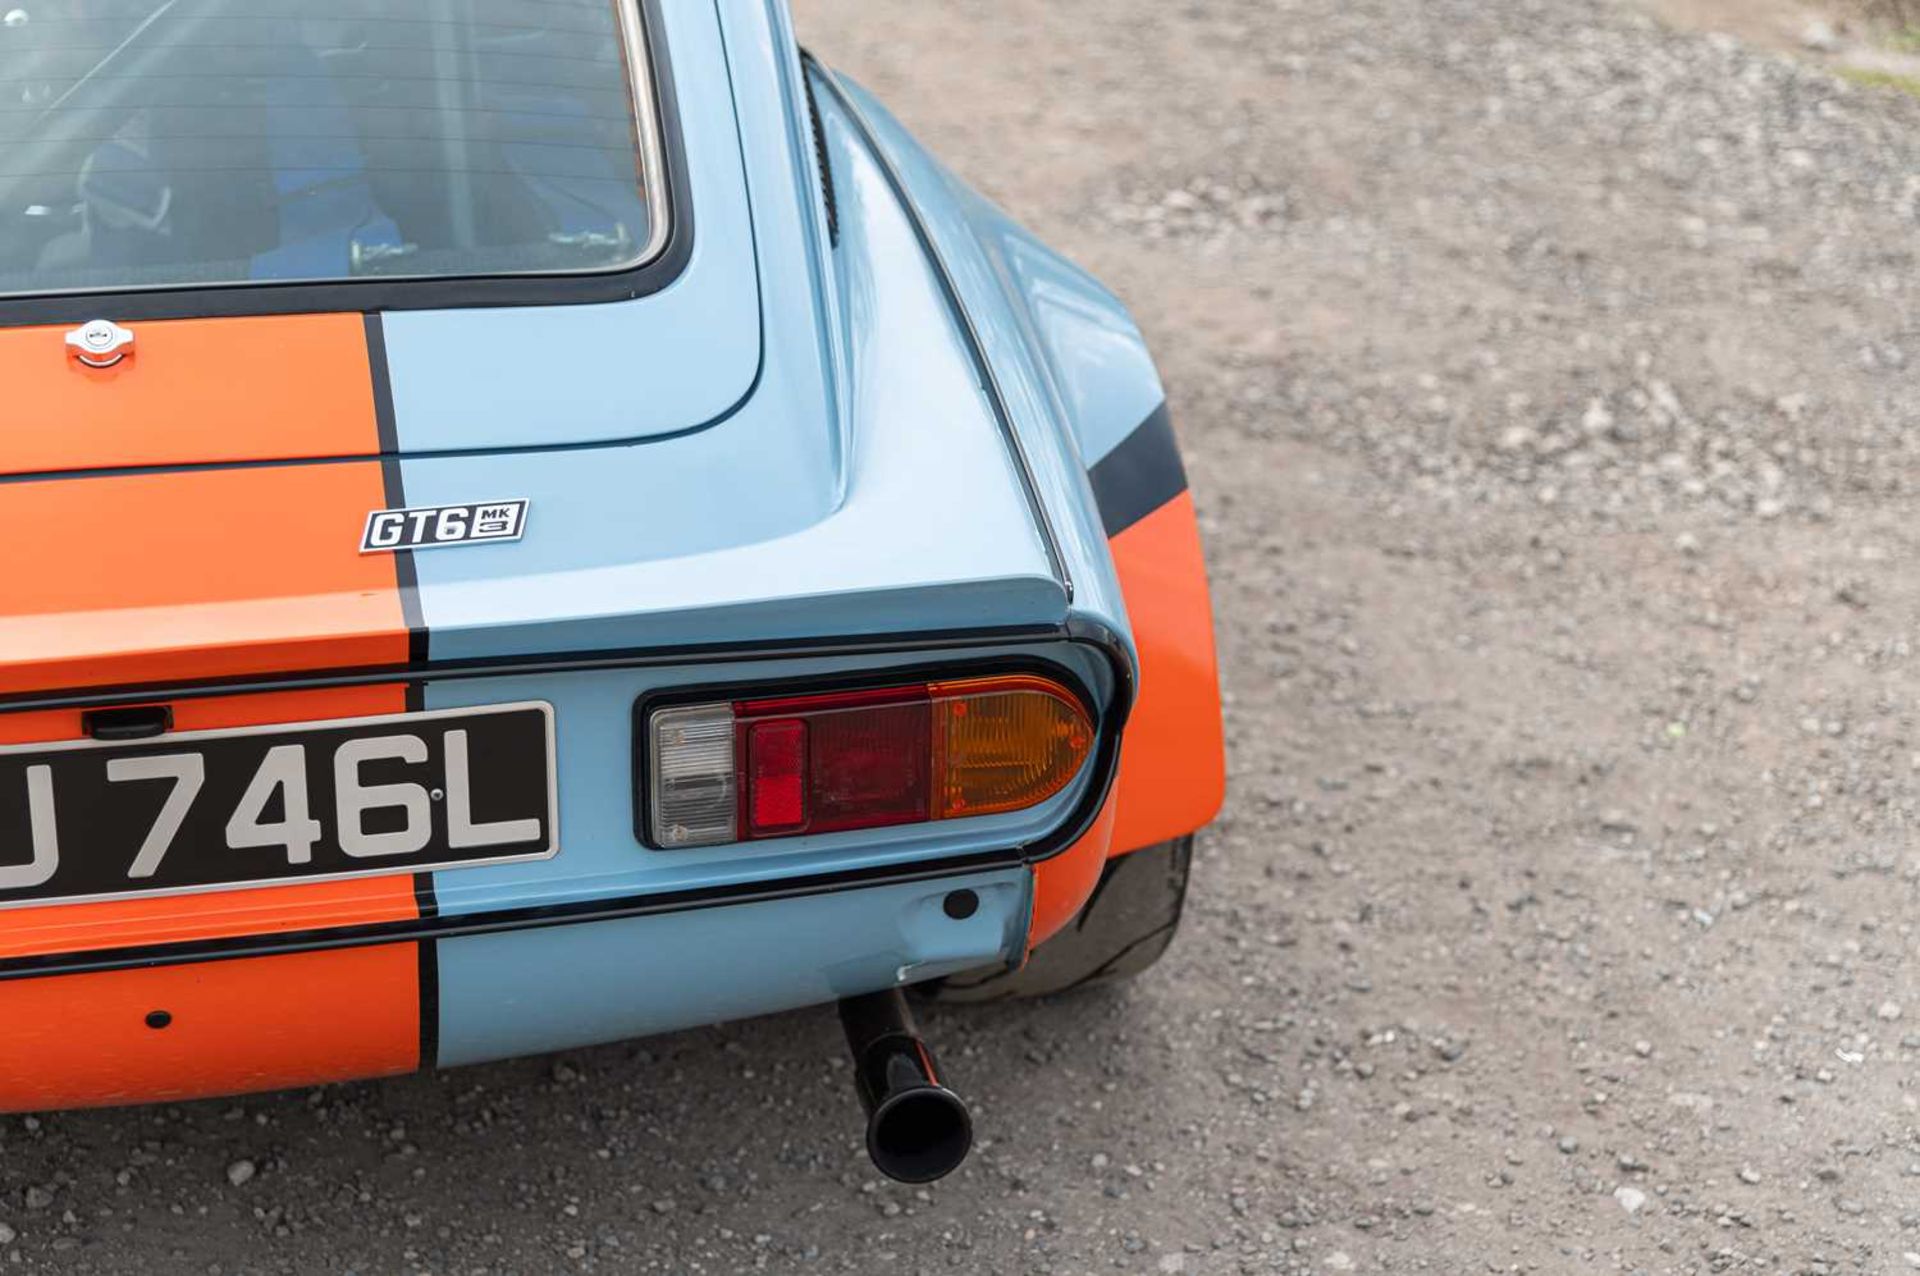 1973 Triumph GT6  ***NO RESERVE*** Presented in Gulf Racing-inspired paintwork, road-going track wea - Image 35 of 65